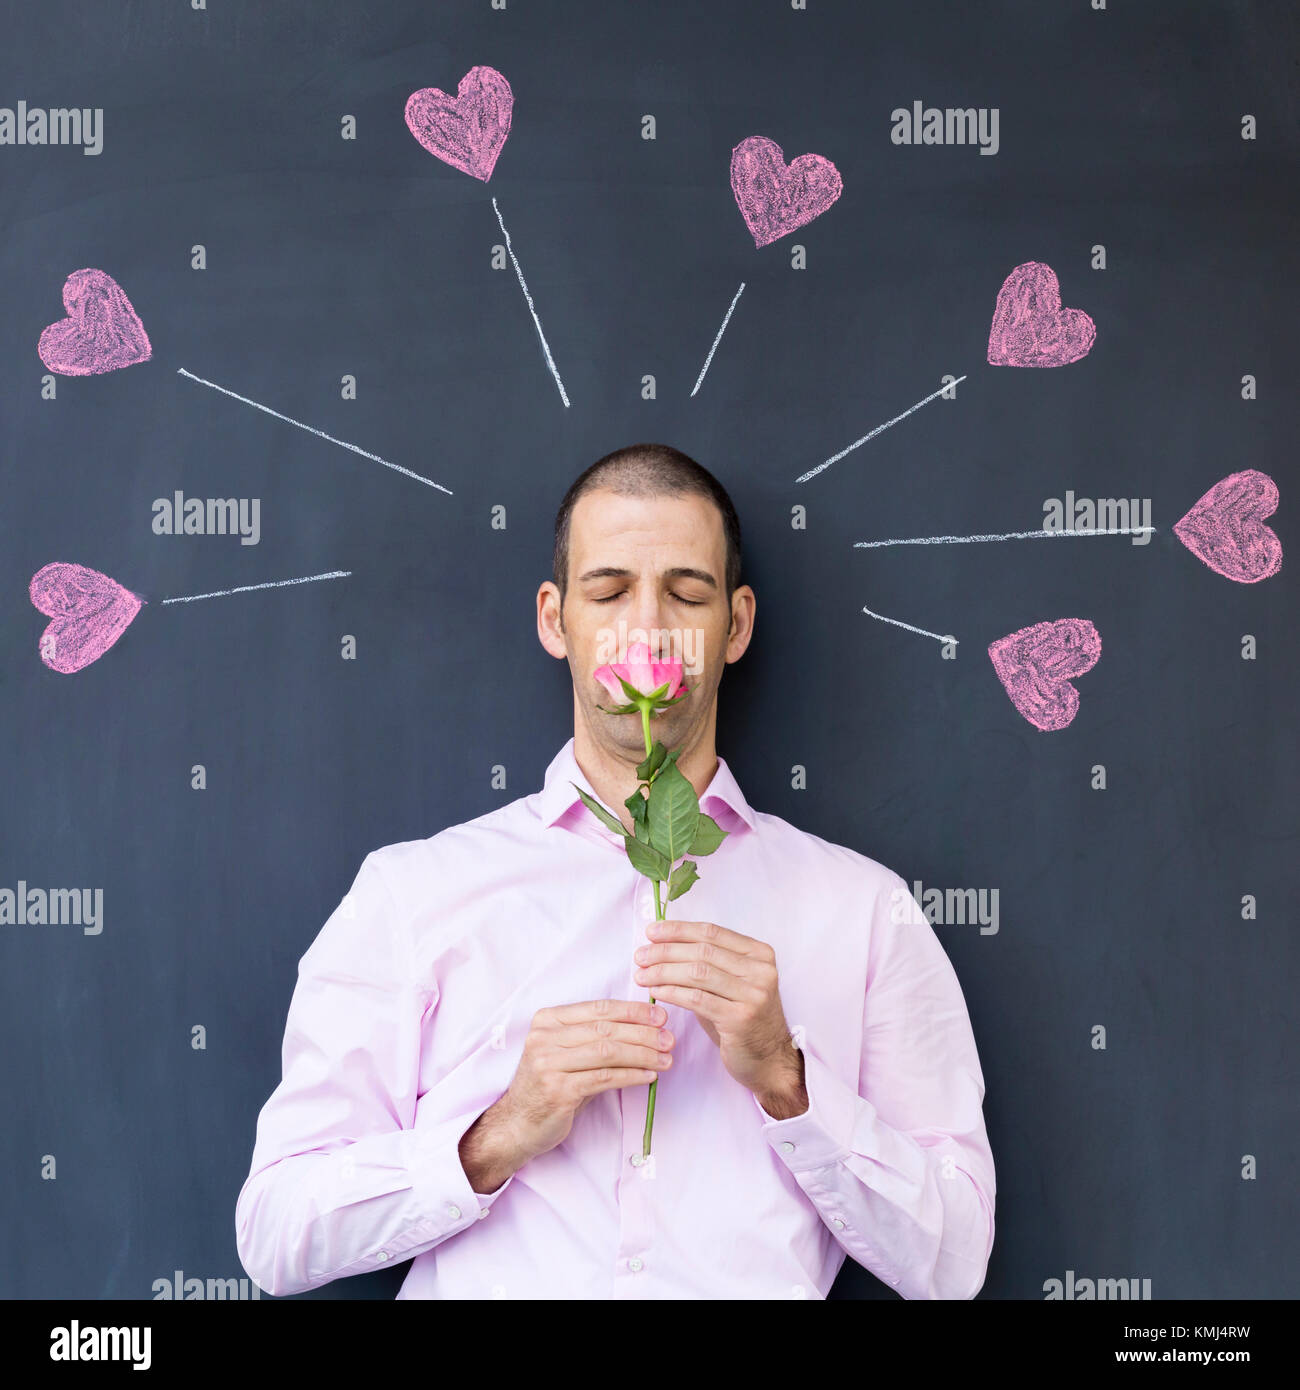 Single adult white man wearing a pink shirt standing in front of a blackboard with painted hearts holding a rose. Concept of crazy love. Stock Photo